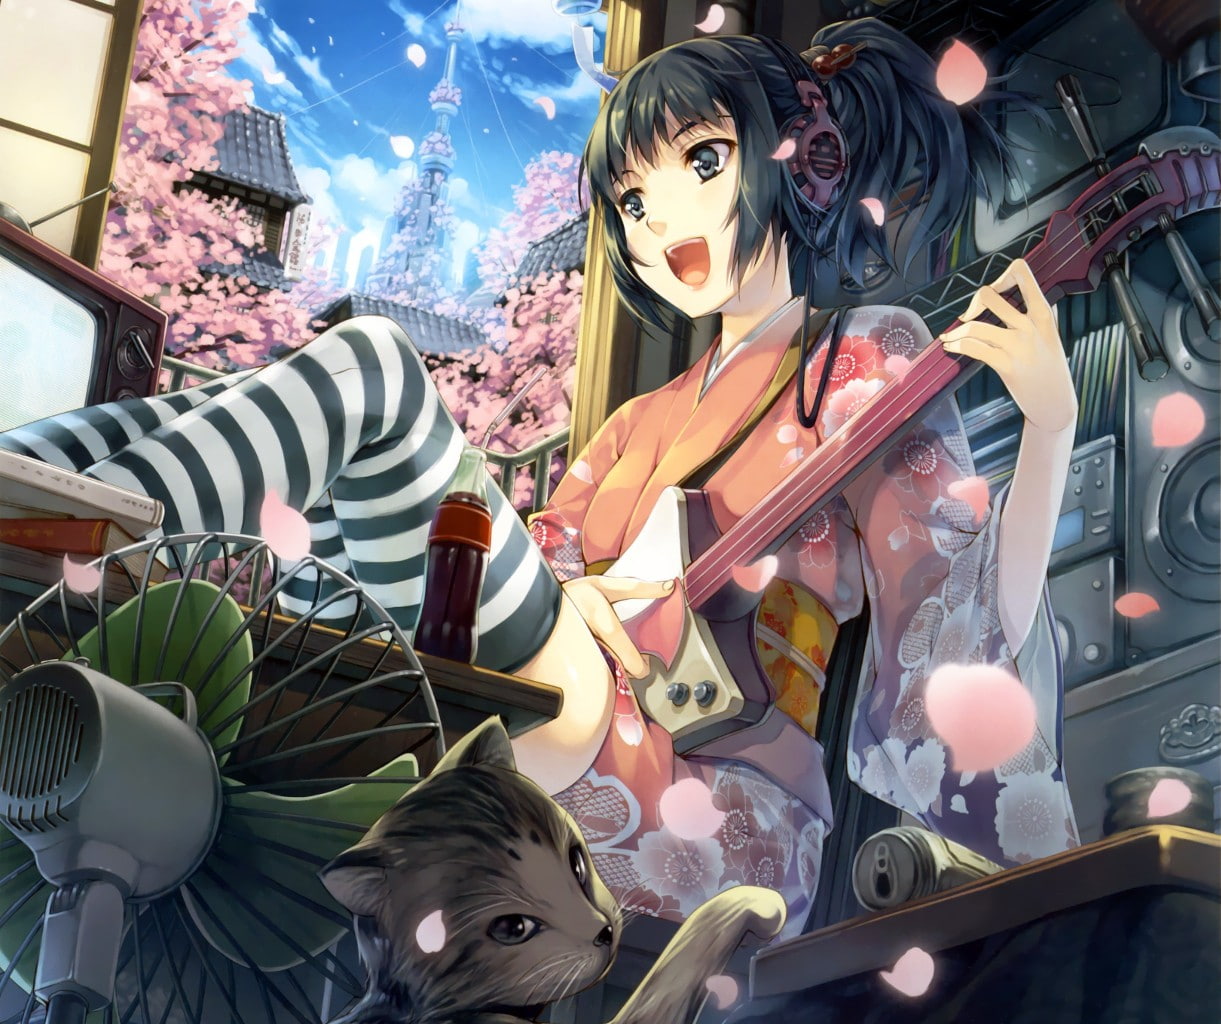 guitar, anime girls, city, Asian architecture, Japanese clothes